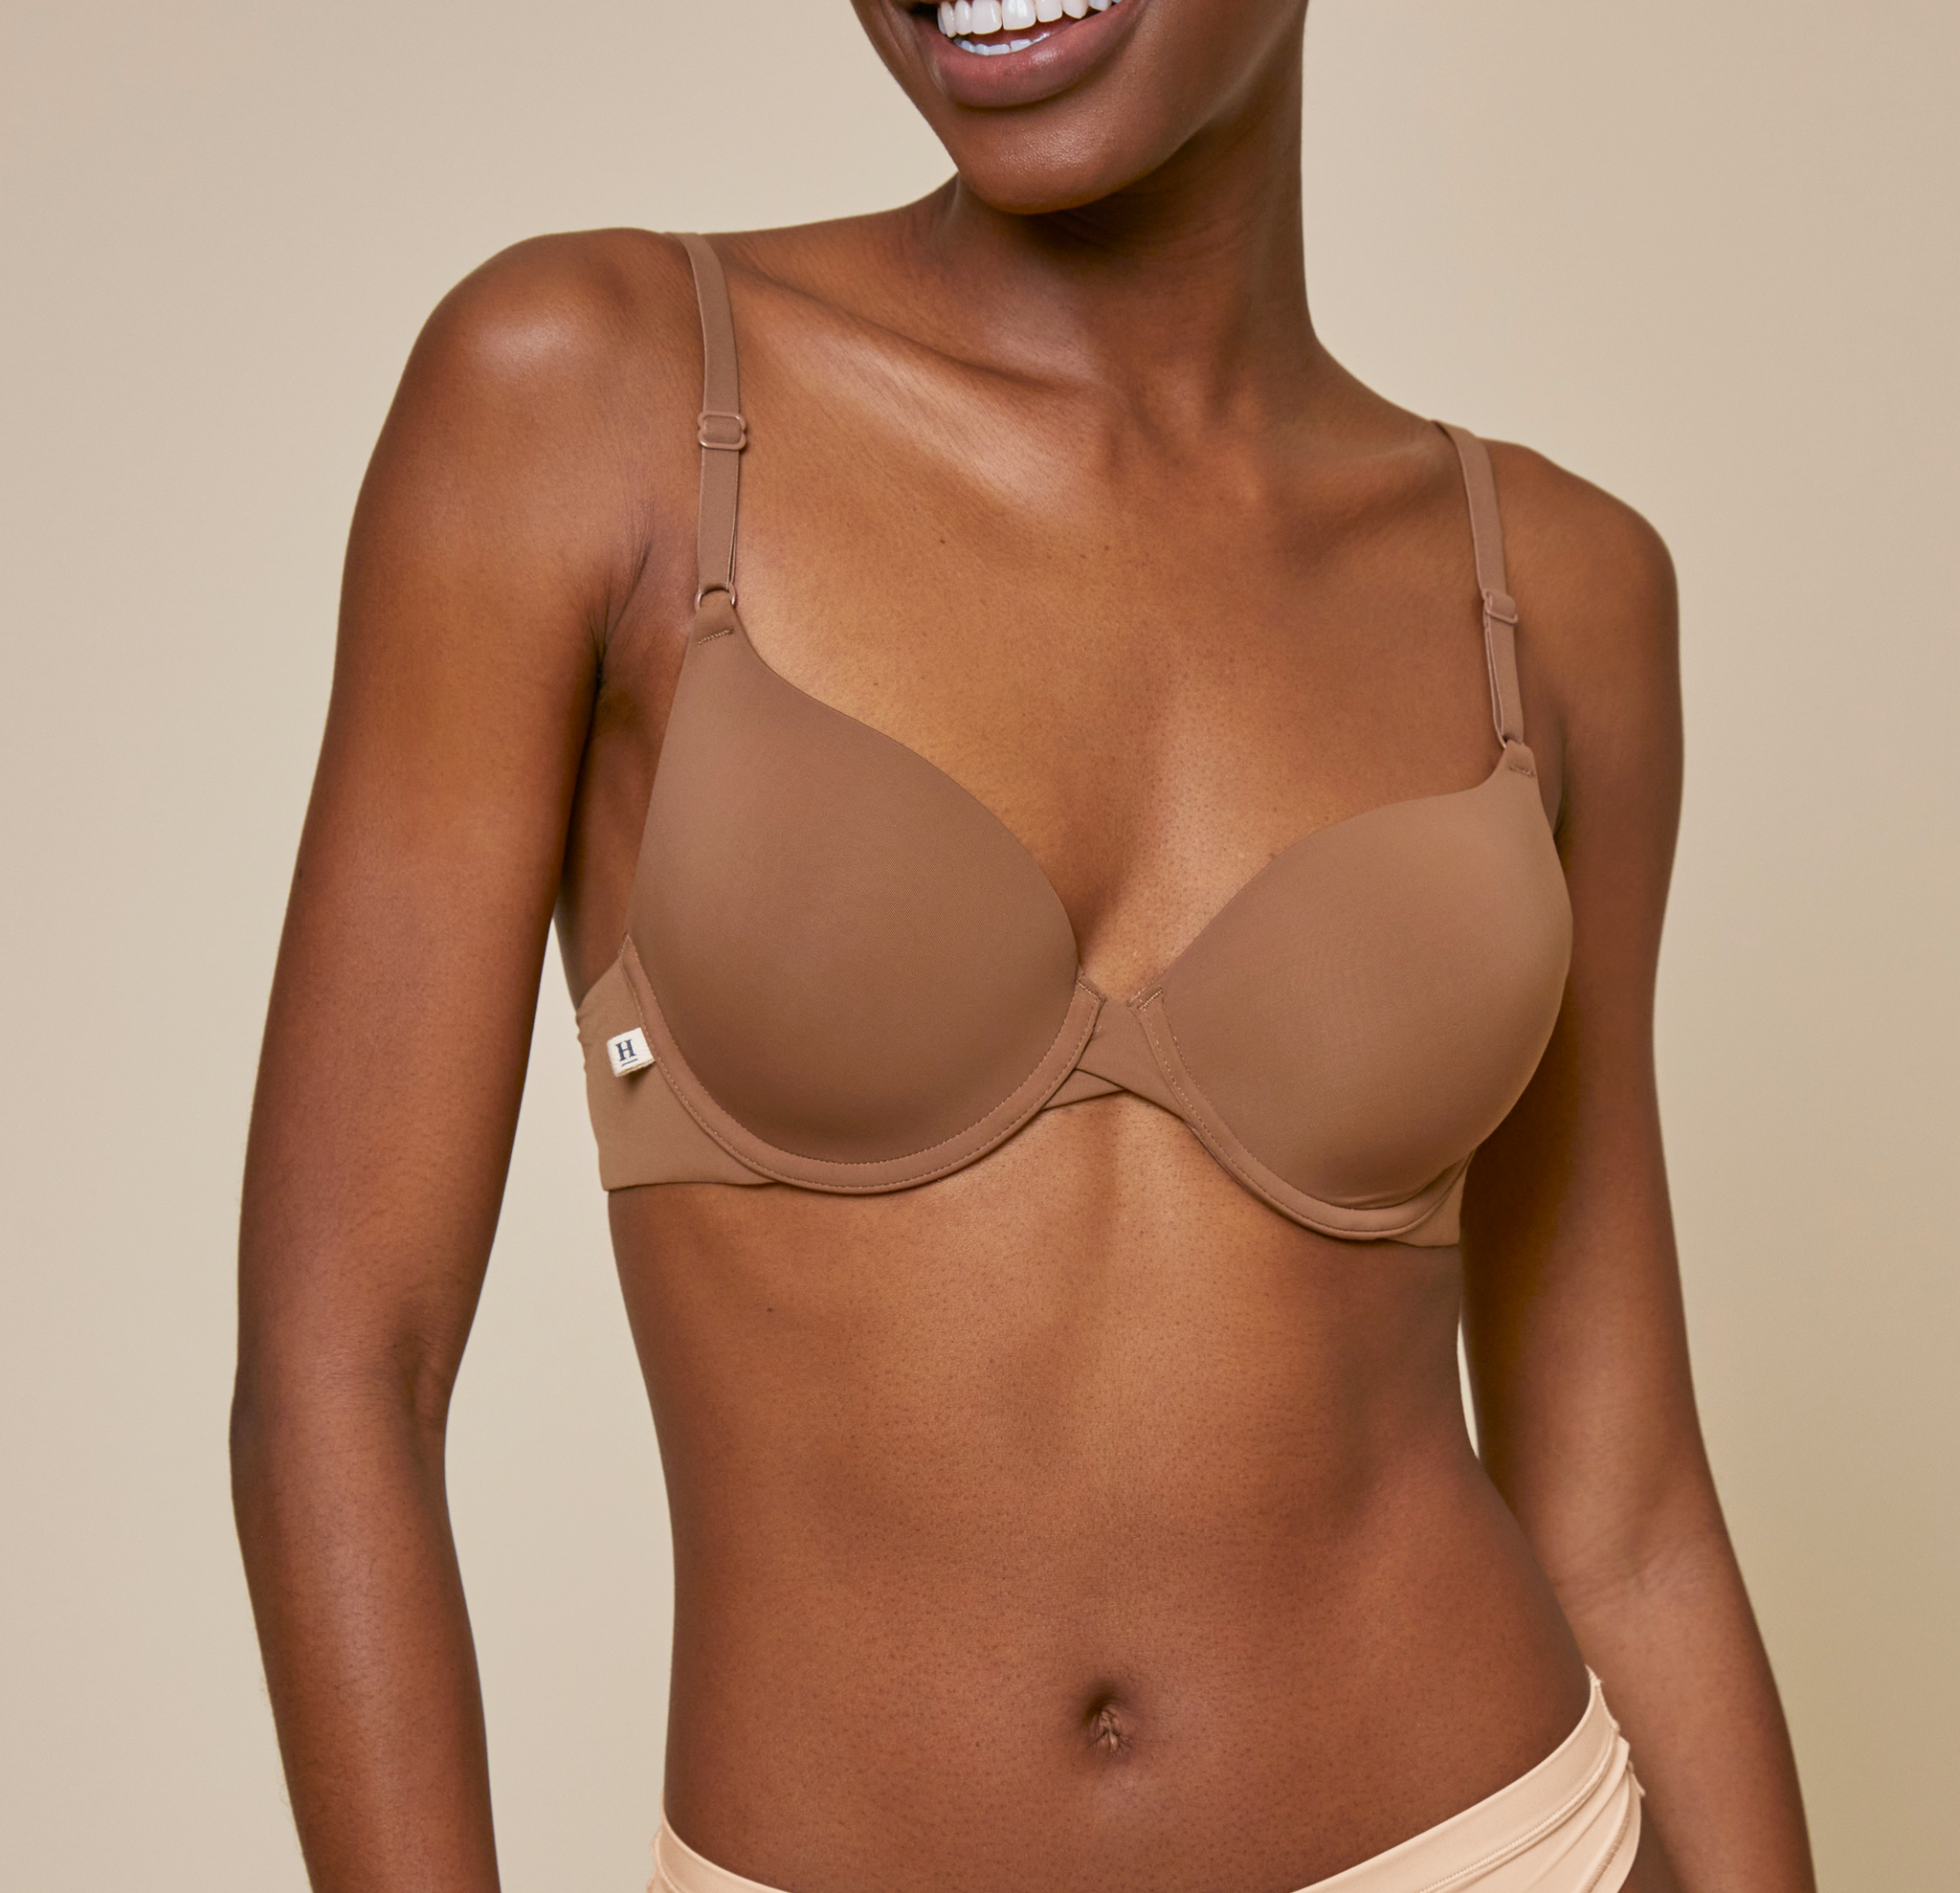 Harper Wilde The Base Bra Review, Price and Features - Pros and Cons of Harper  Wilde The Base Bra